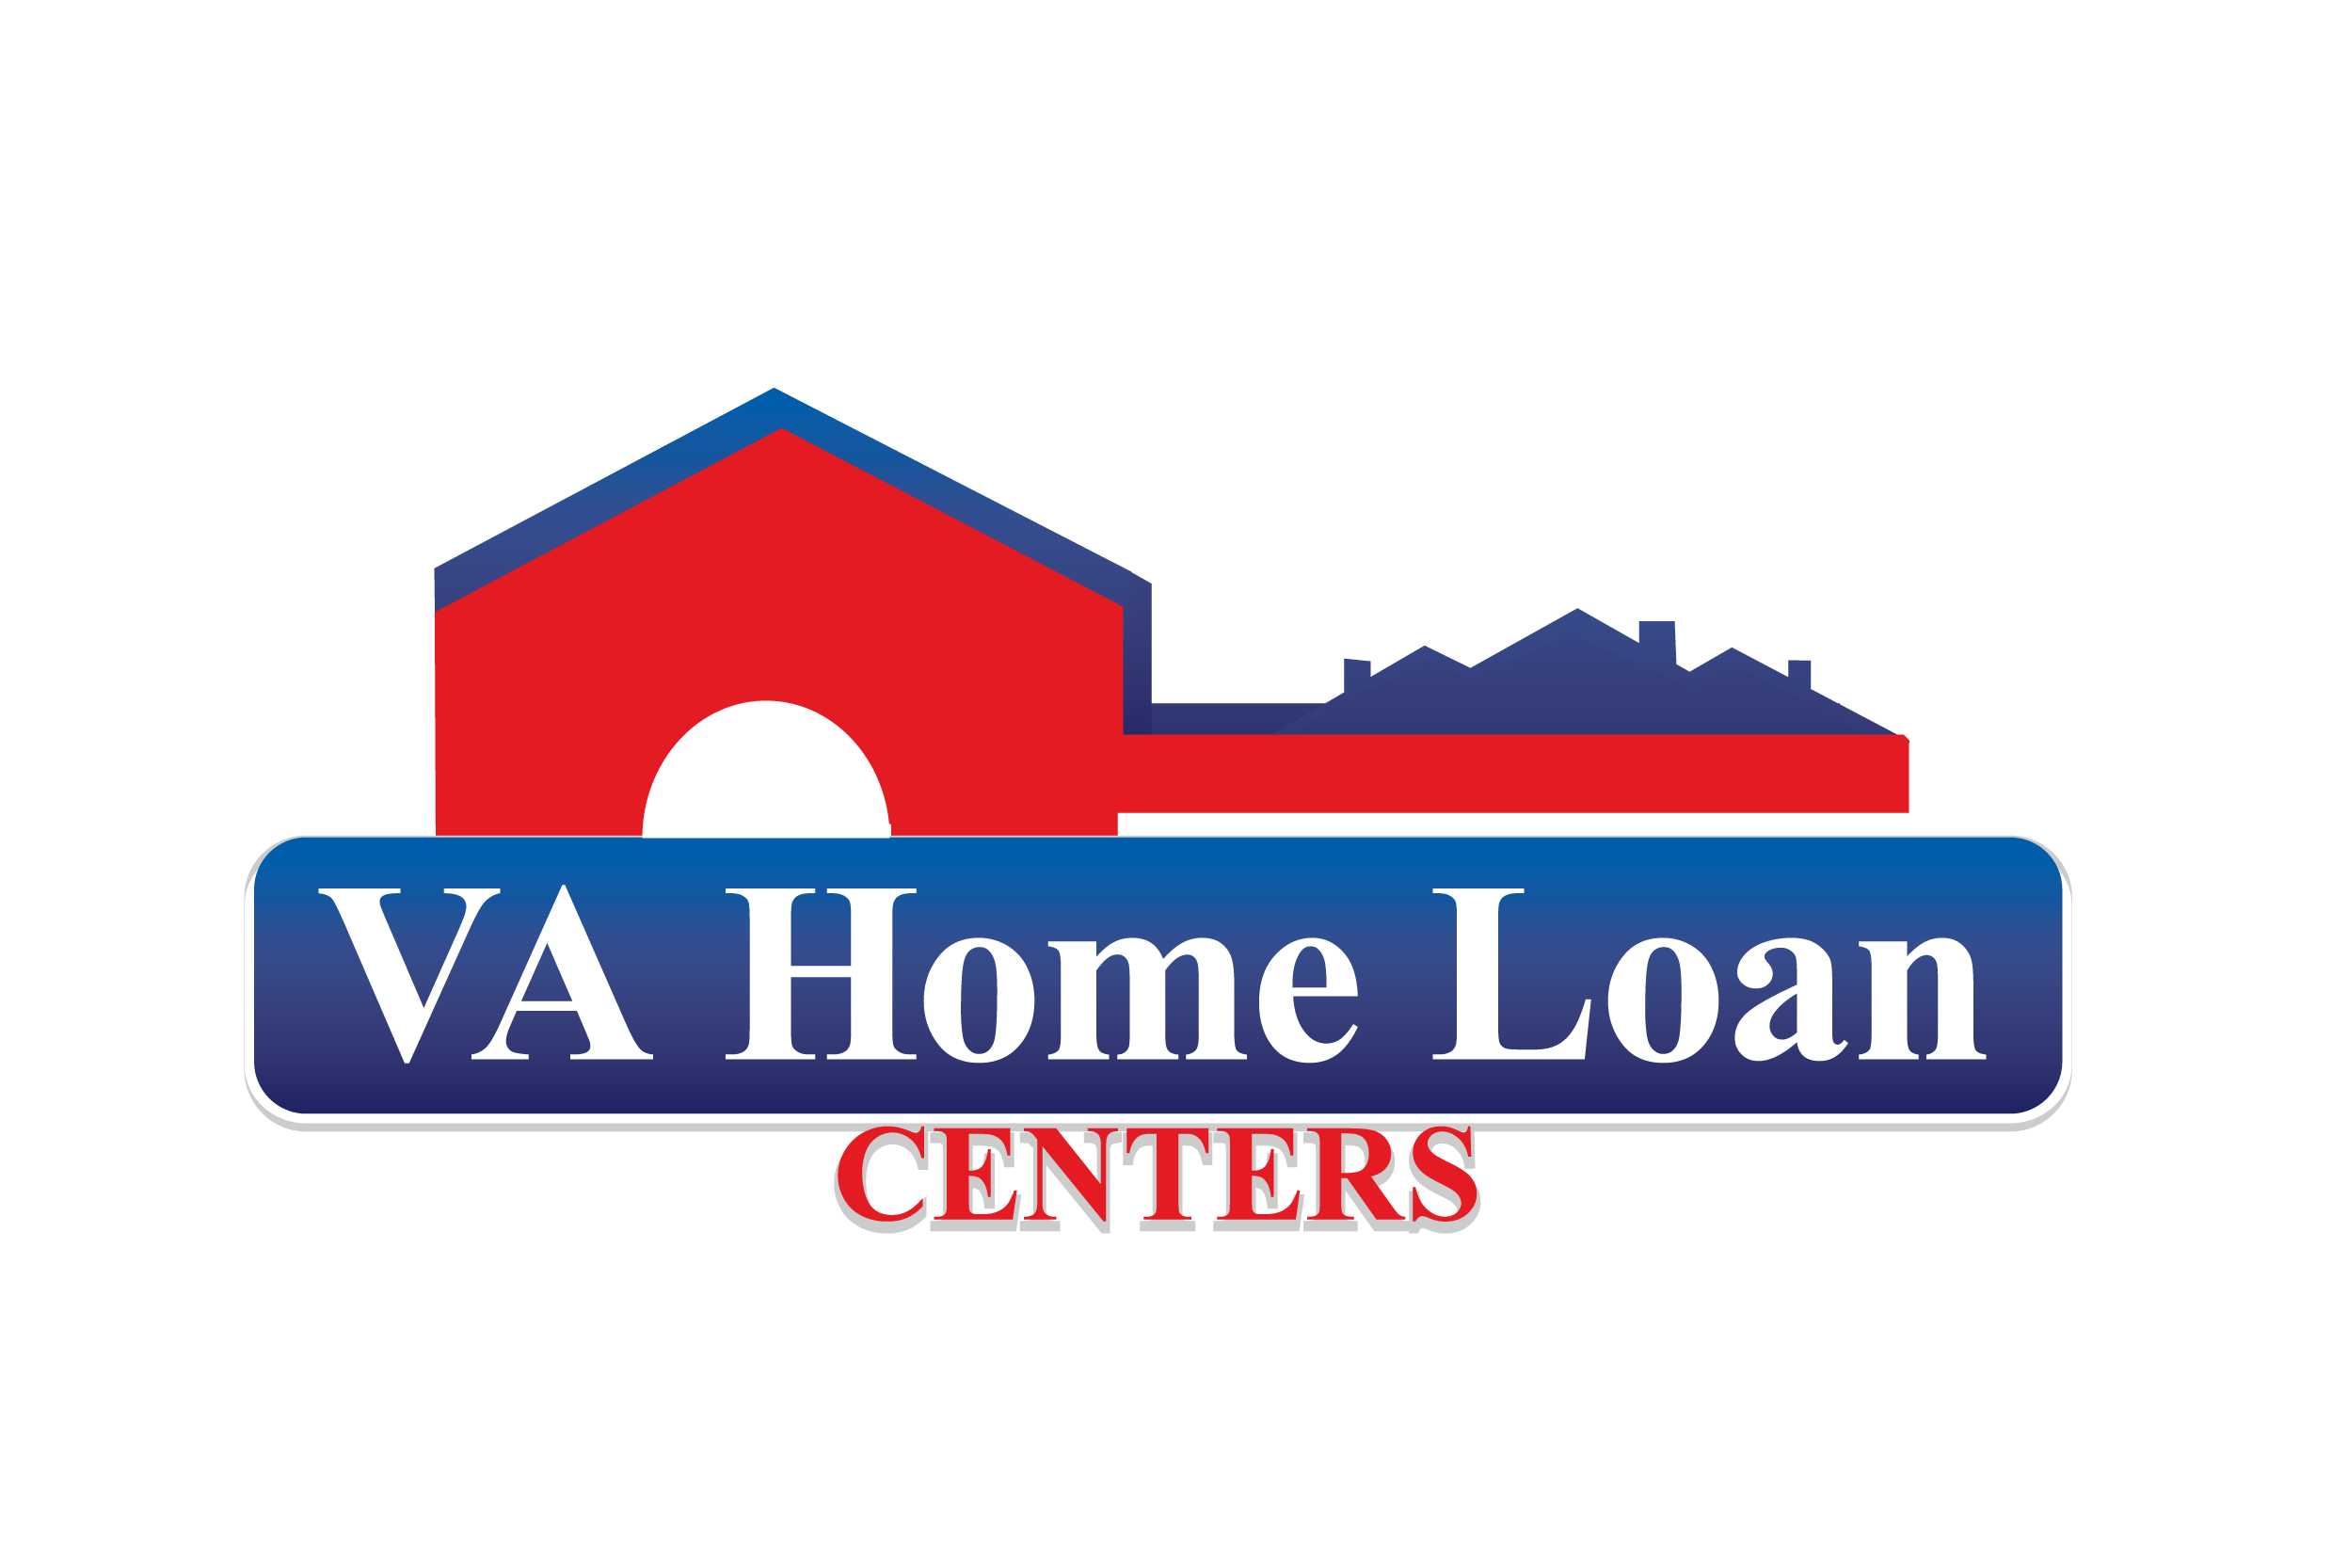 Va Home Loan Centers First Military Mortgage Provider To Extend Financing To Same Sex Couples 8051